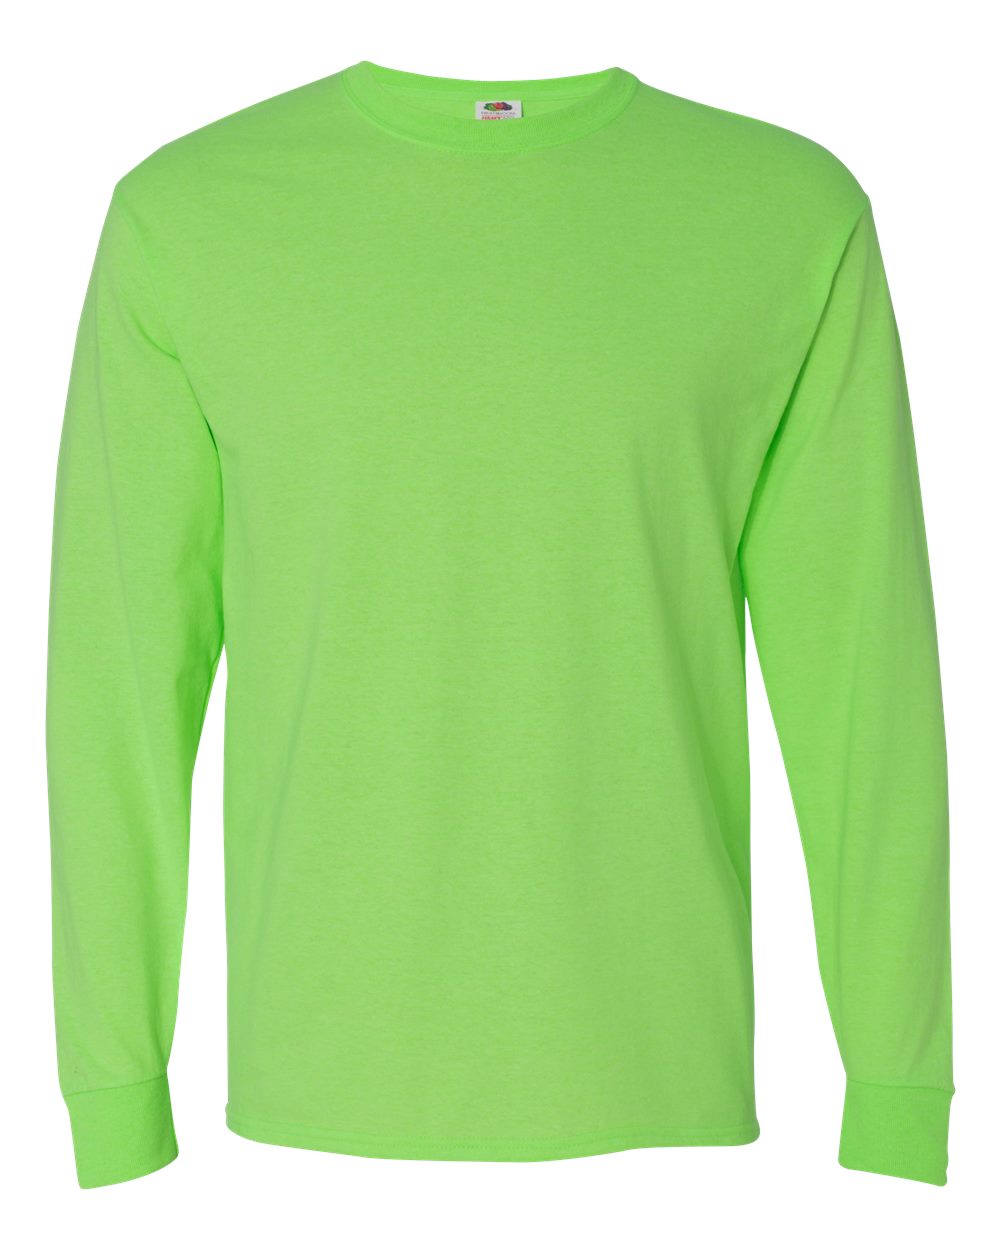 Fruit of the Loom 4930R Heavy Cotton Long Sleeve T-Shirt $6.19 - T-Shirts